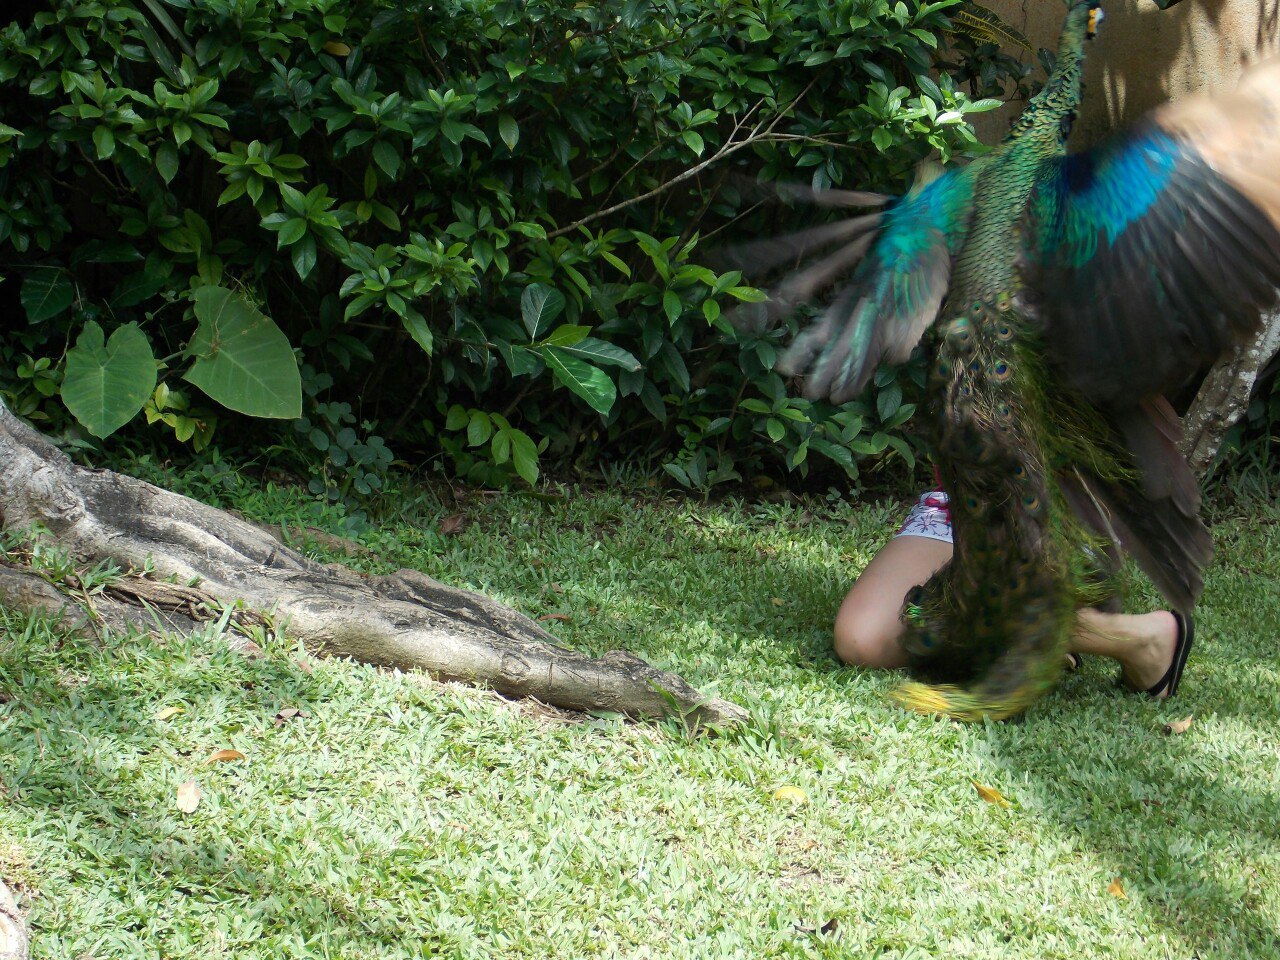 Well, a very petting zoo - My, Contact zoo, Wild peacock, Friend, Indonesia